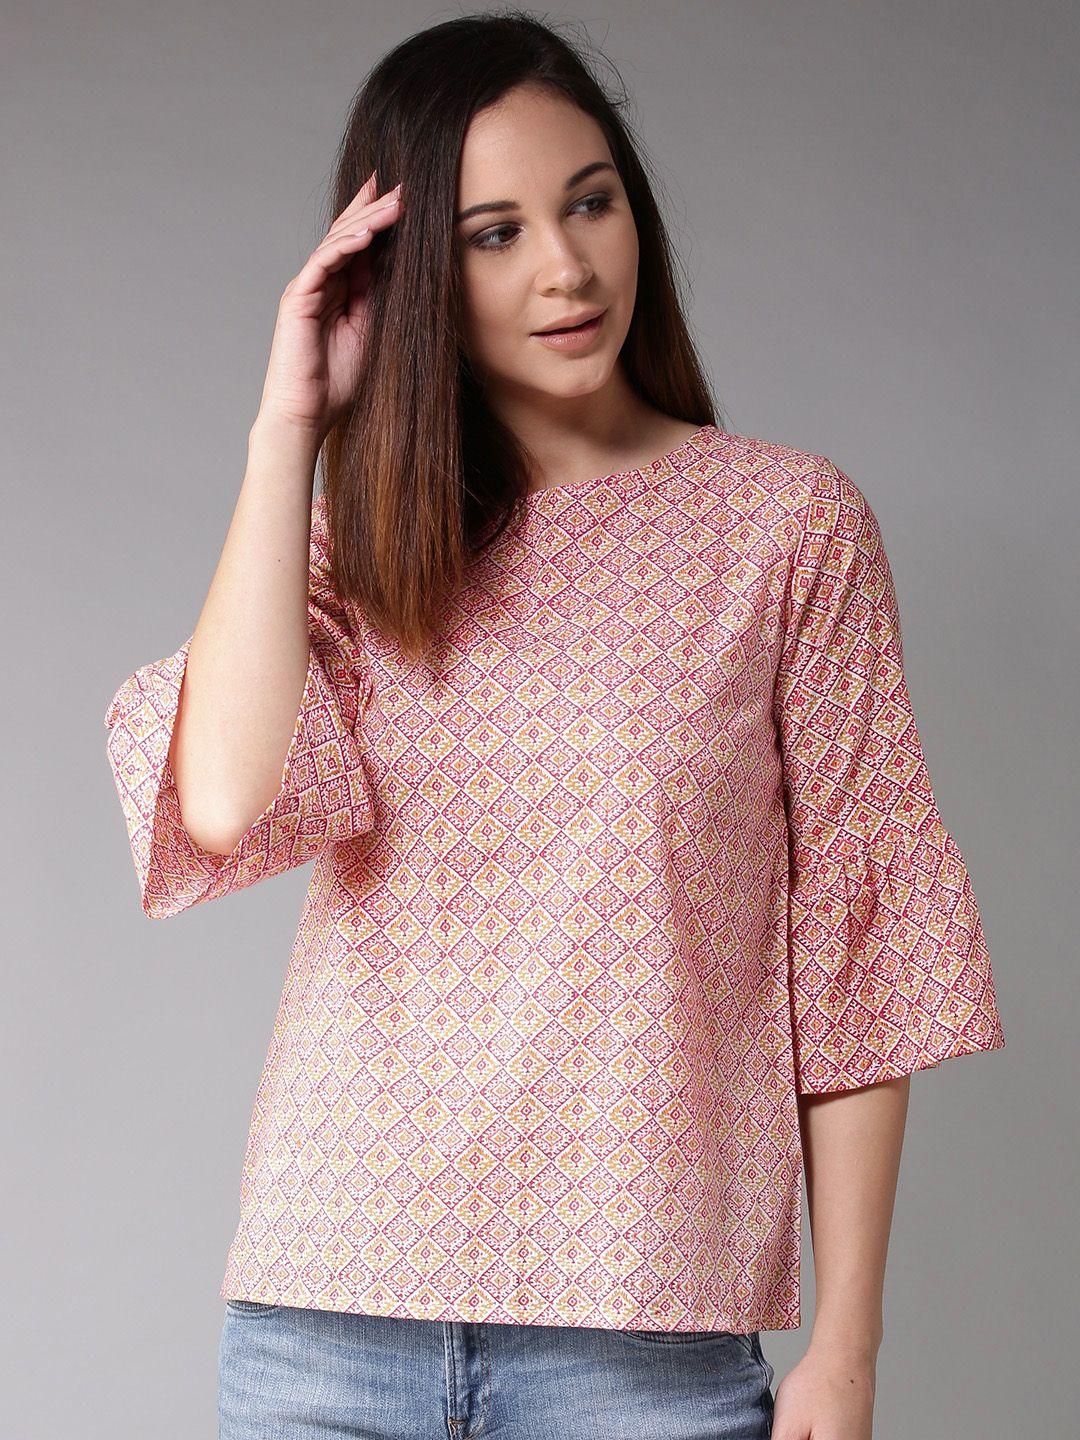 here&now women pink printed pure cotton top